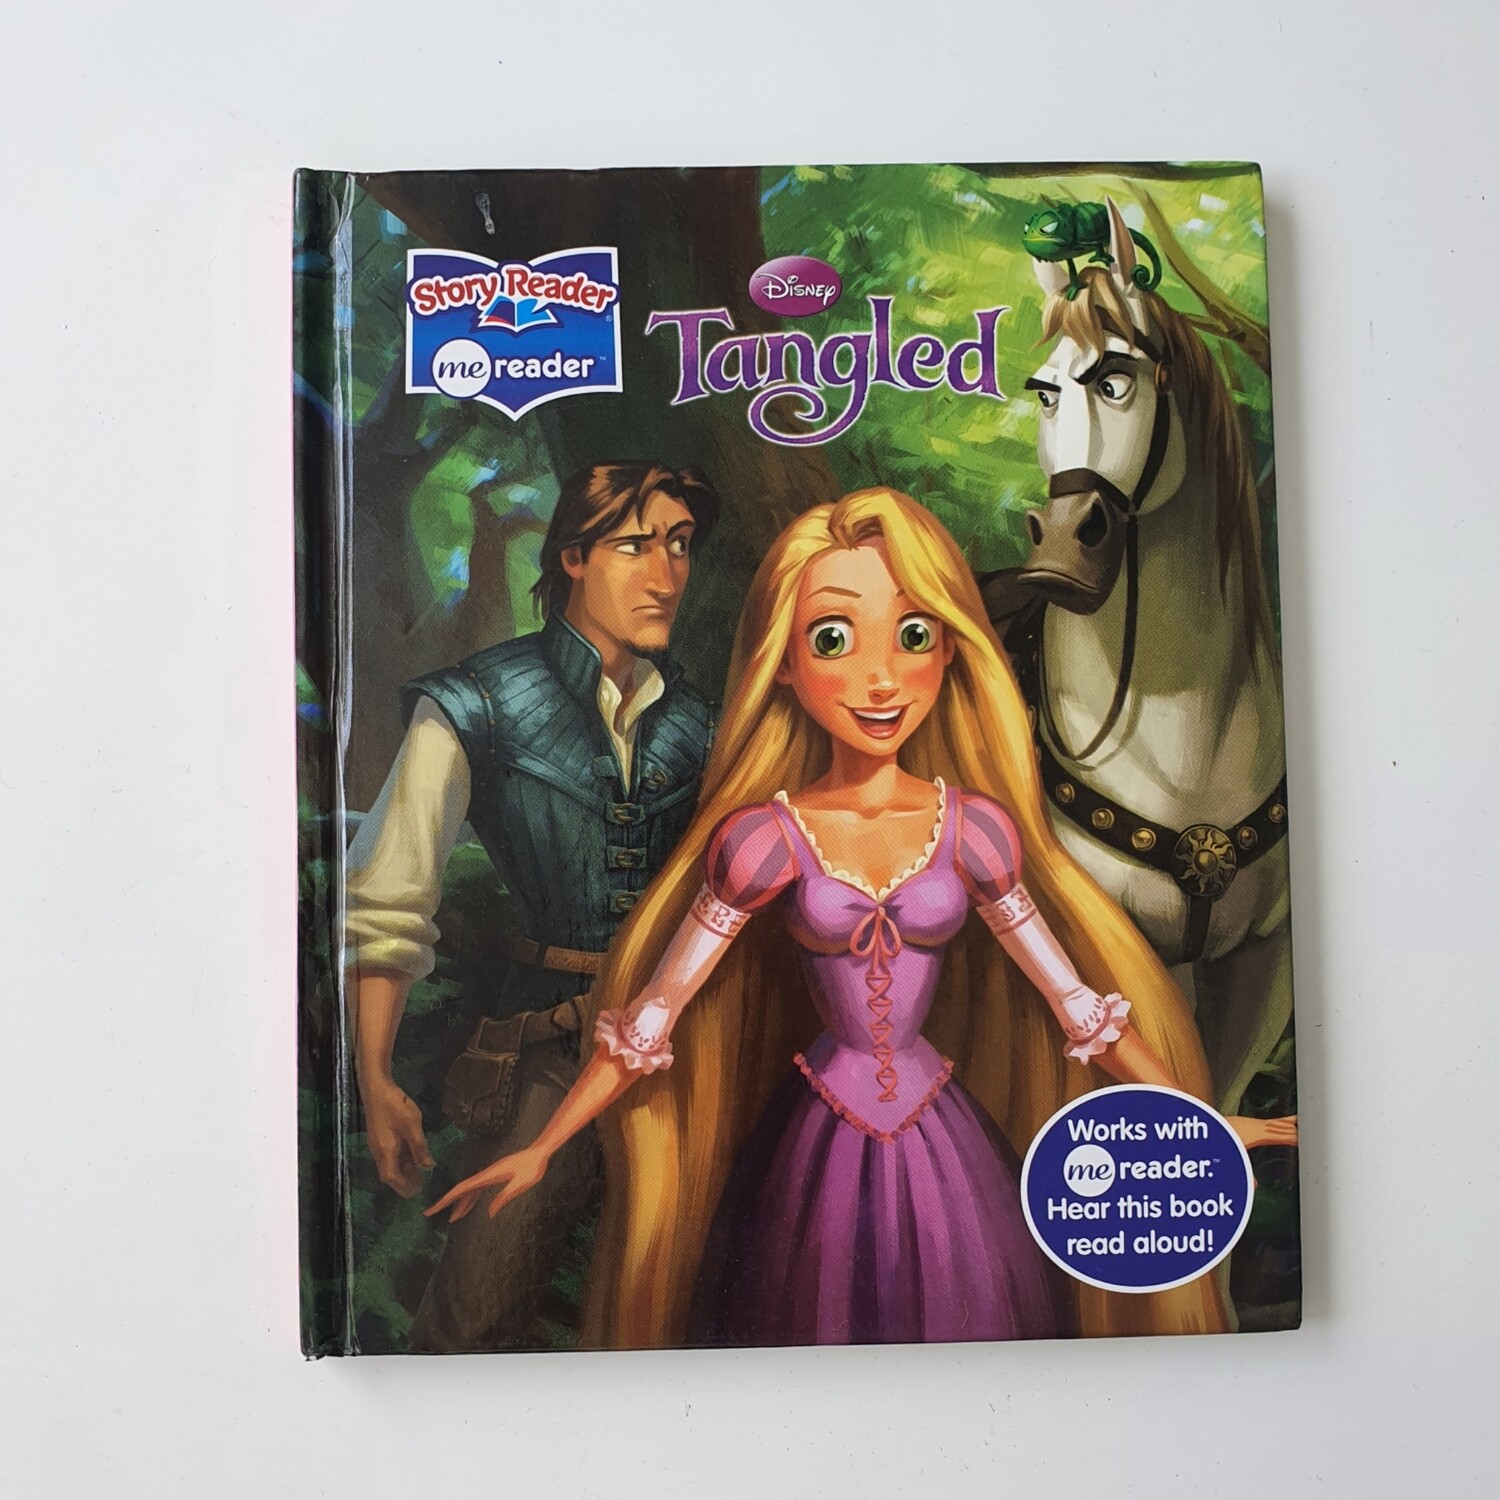 Tangled Notebook